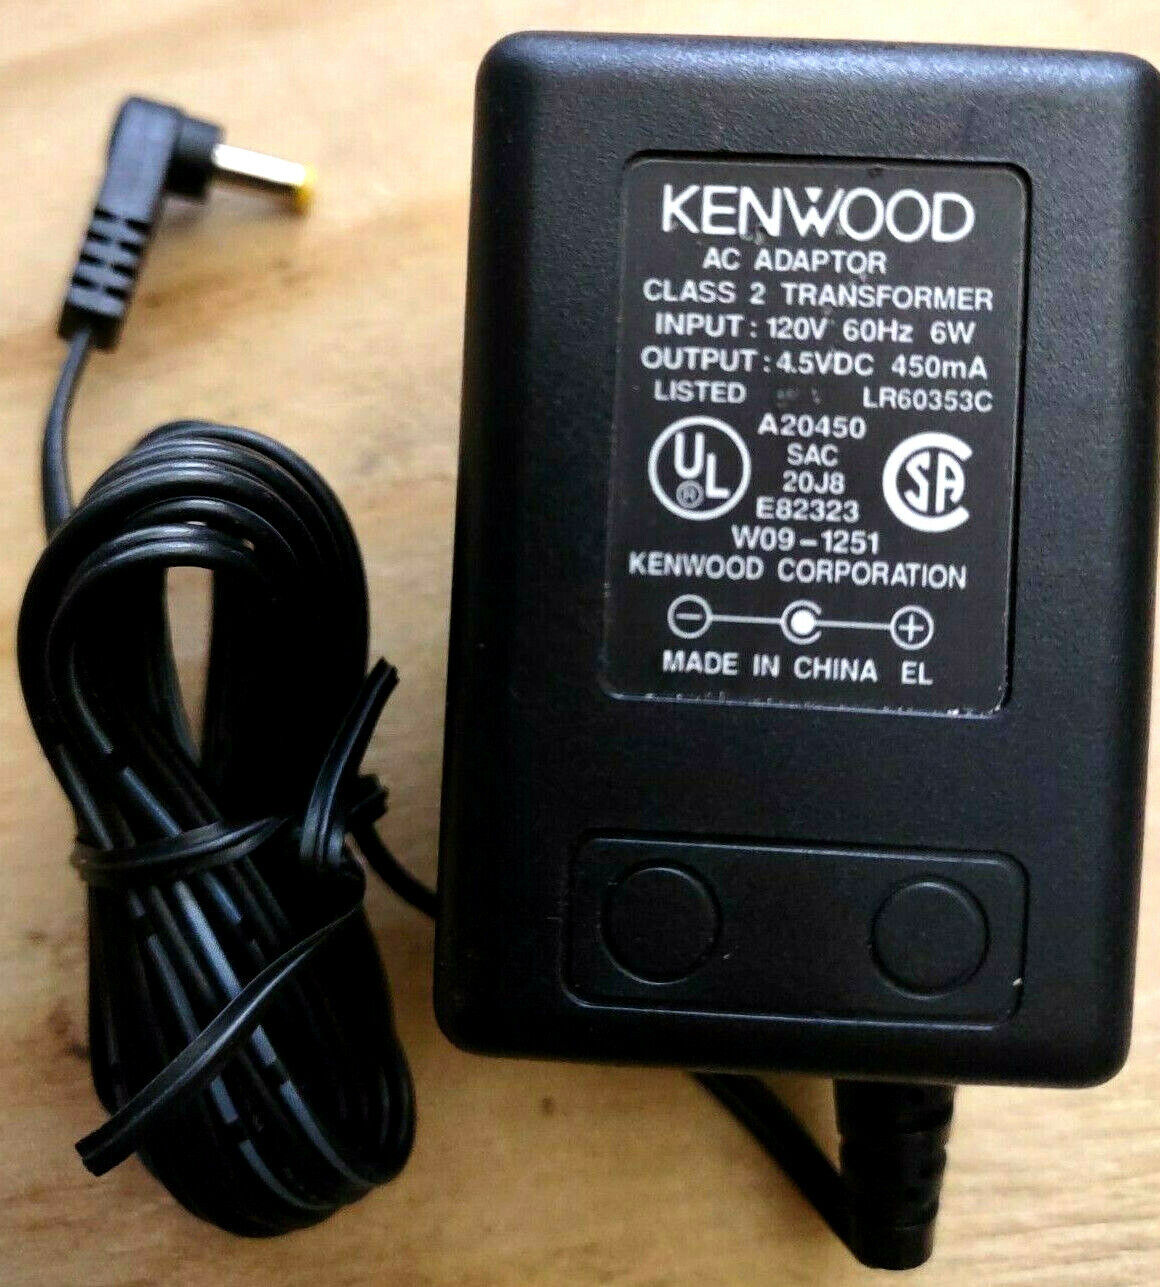 AC Adapter Charger for Kenwood A20450 E83323 W09-1251 Power Supply Cord Features: Powered Brand: Kenwood Cable Lengt - Click Image to Close